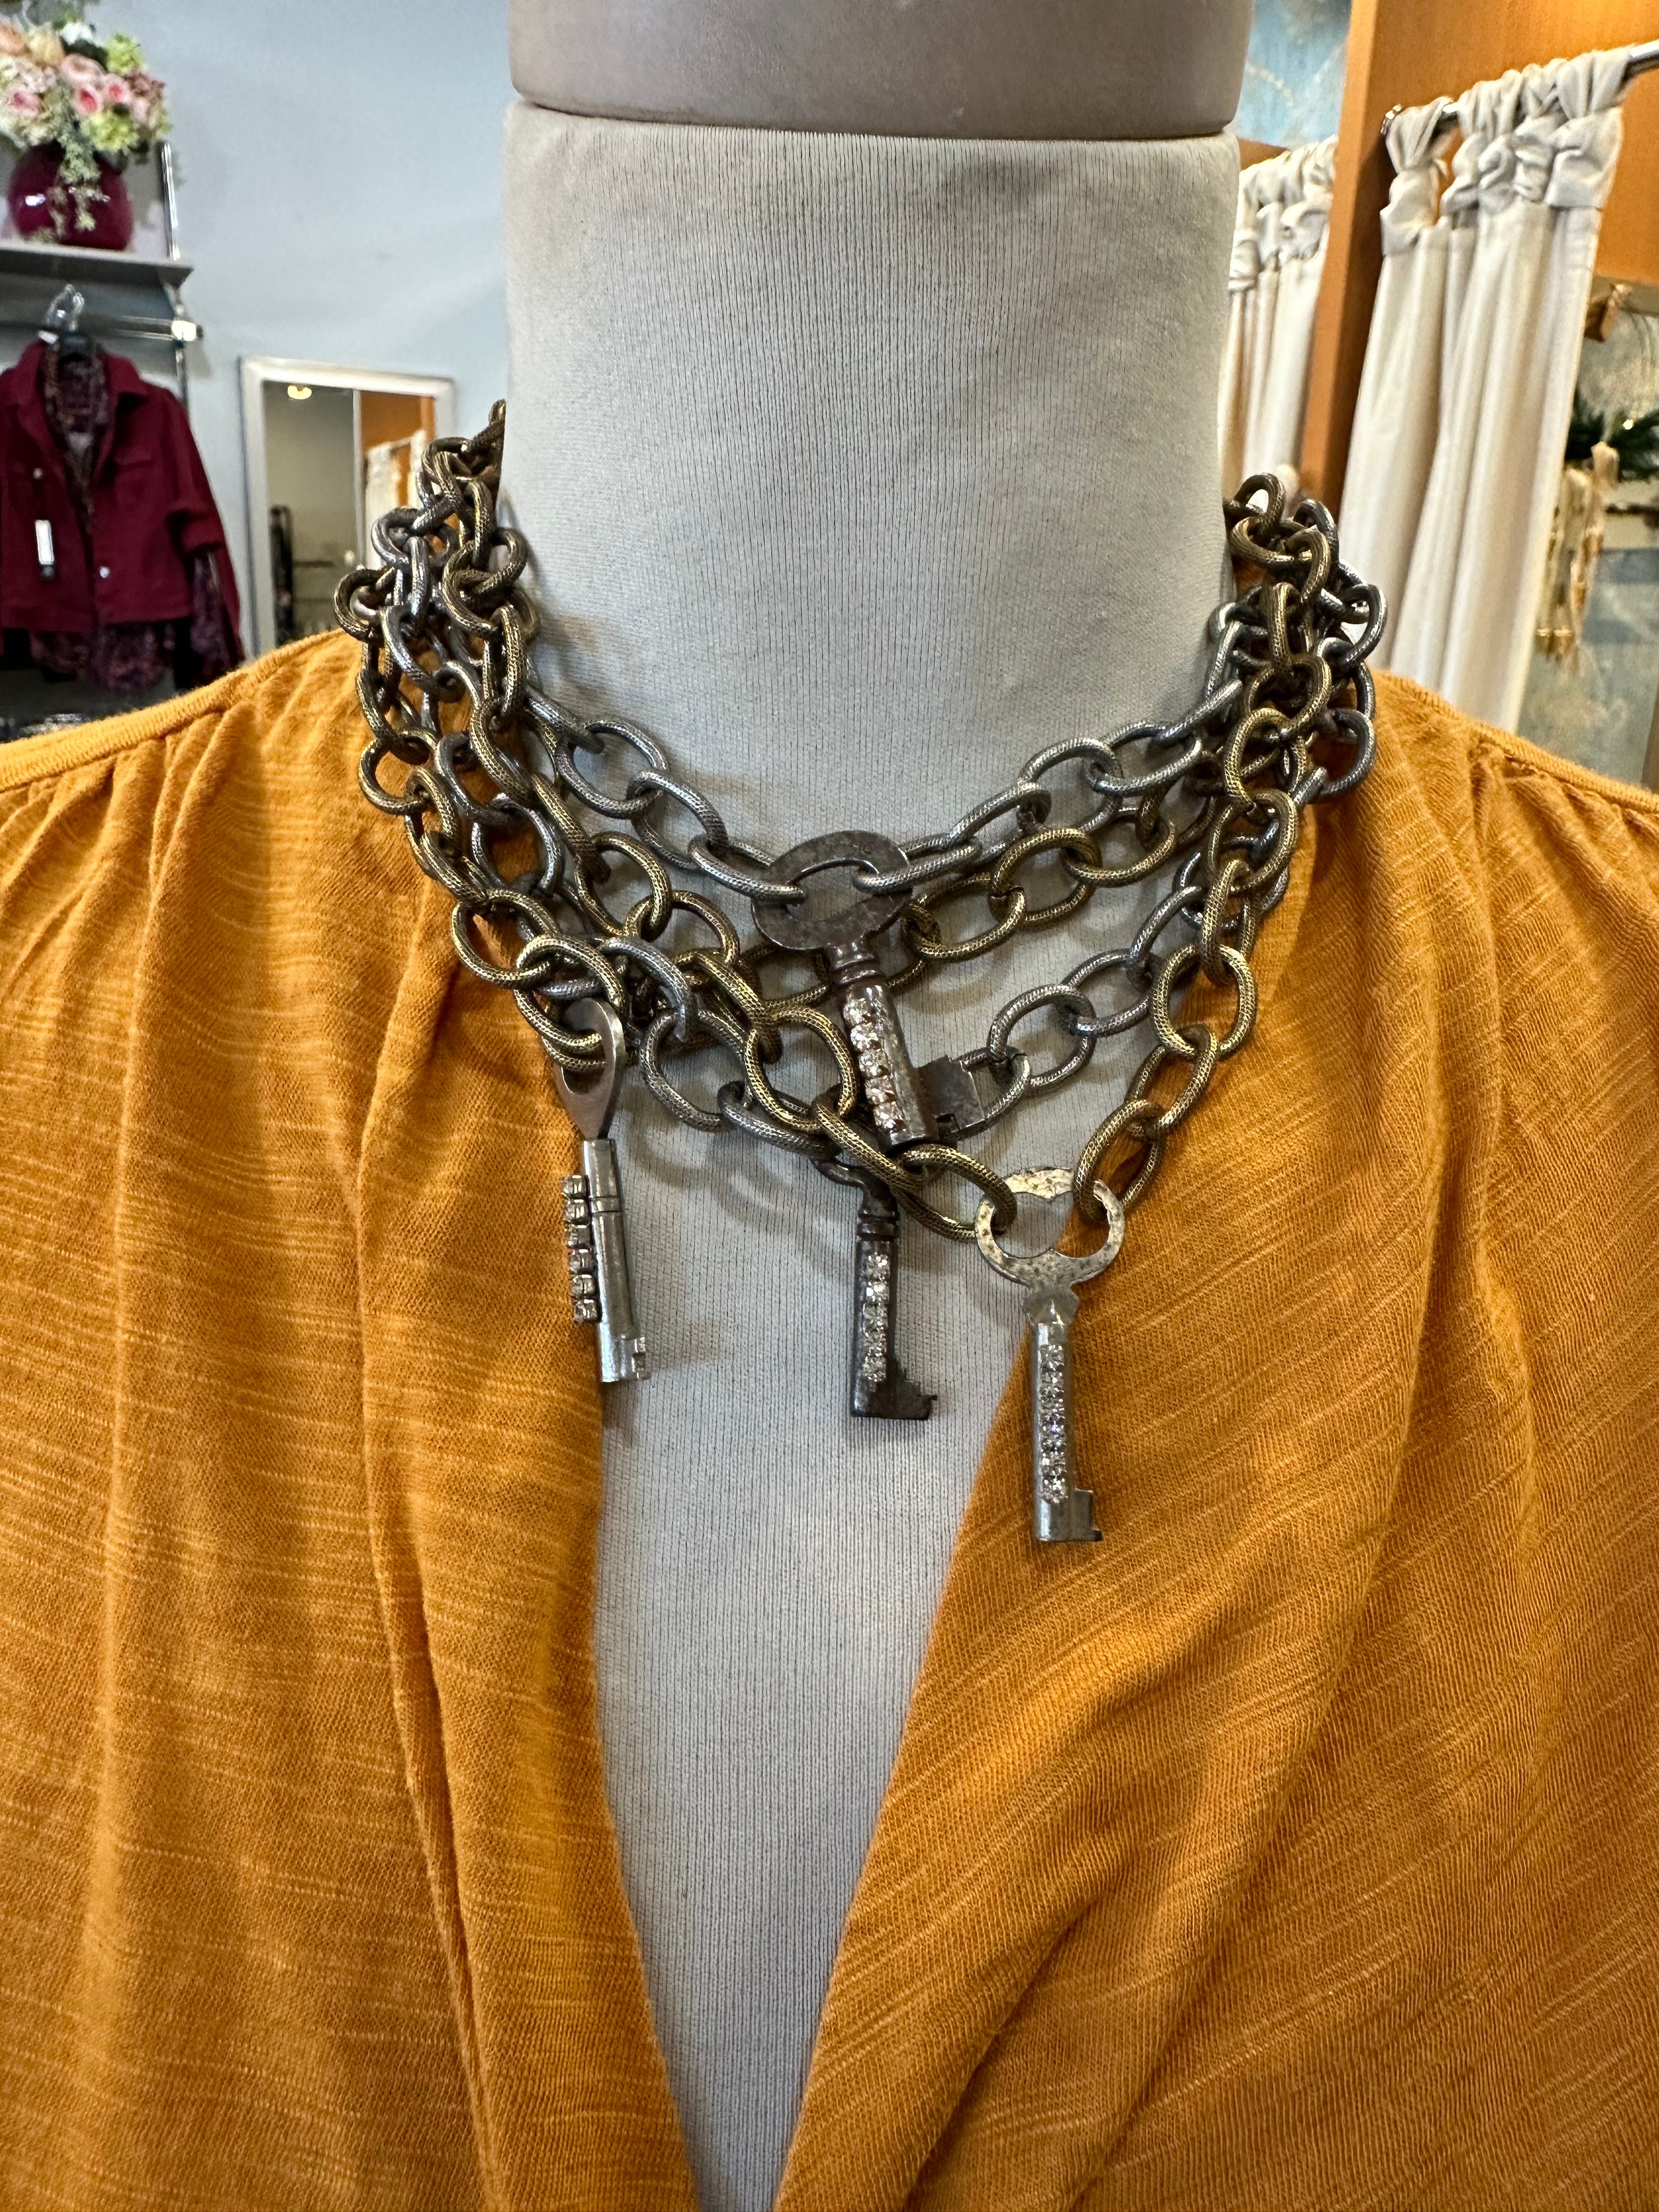 BV Chunky chain with bling key